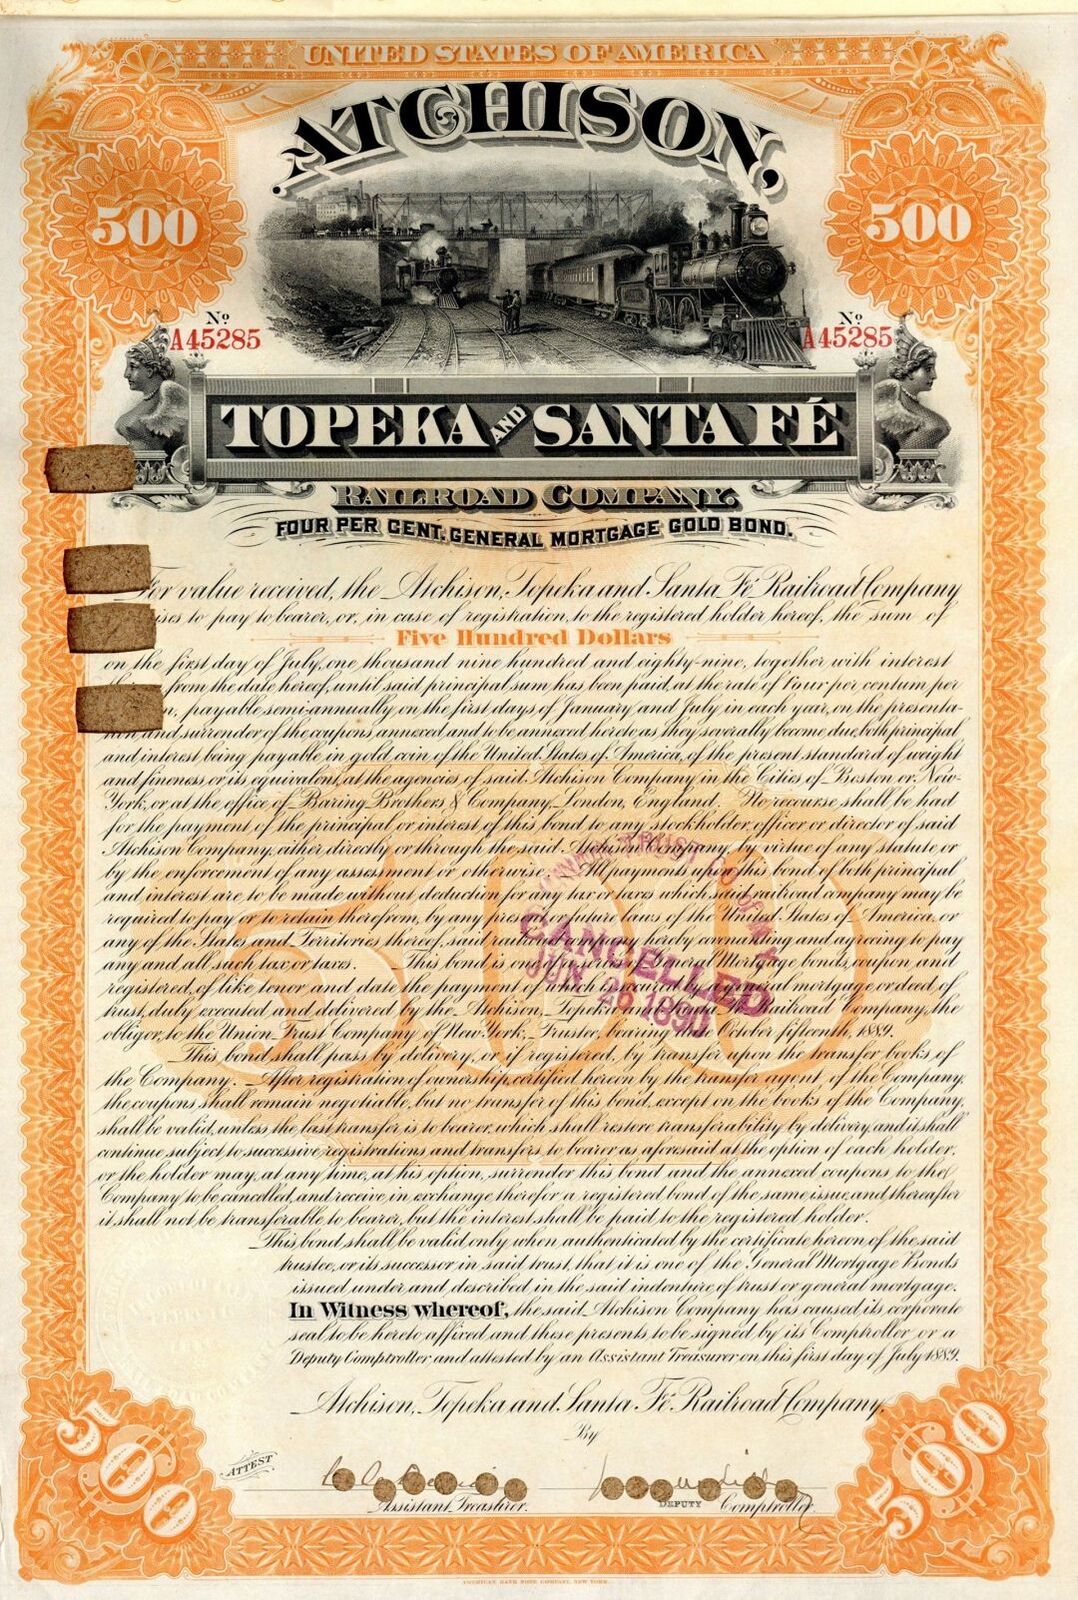 Atchison, Topeka and Santa Fe Railroad Co. - 1889 dated $500 Railway Gold Bond -